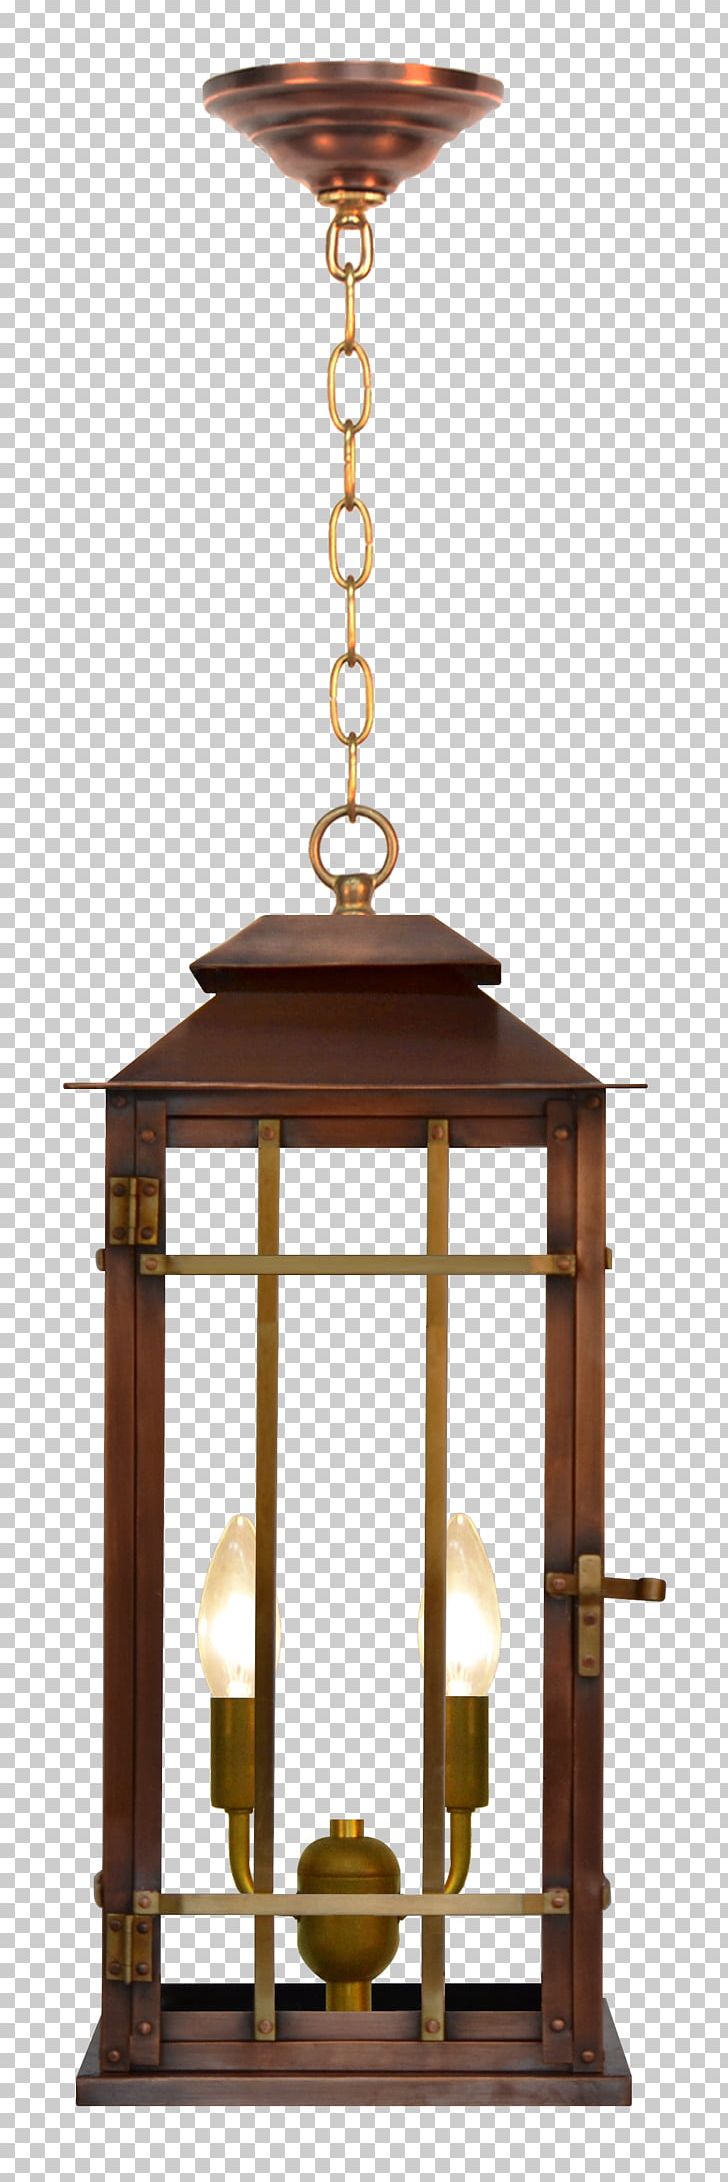 Gas Lighting Lantern Light Fixture PNG, Clipart, Candle, Ceiling Fixture, Coppersmith, Electricity, Electric Light Free PNG Download